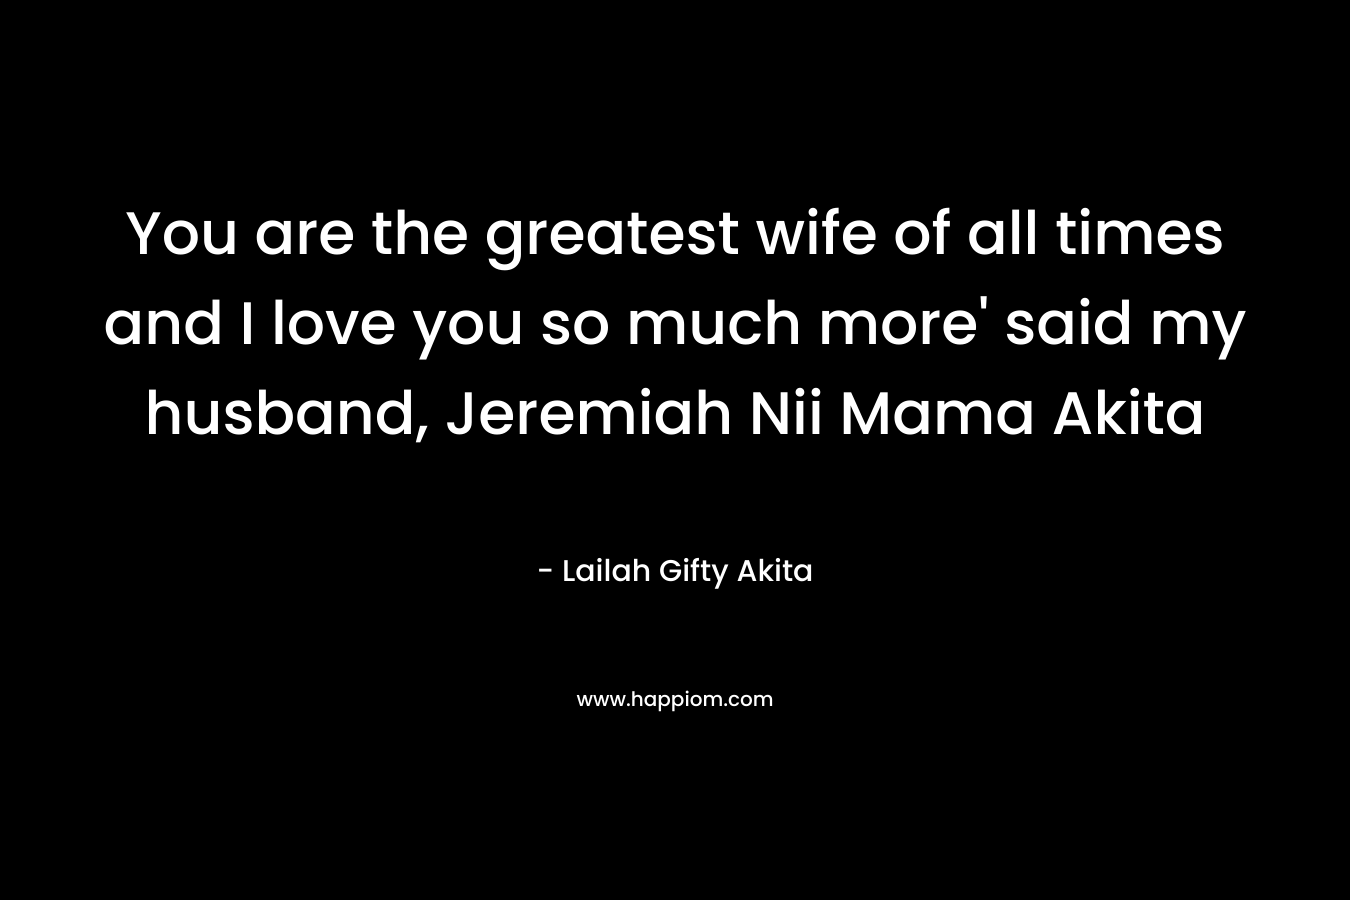 You are the greatest wife of all times and I love you so much more’ said my husband, Jeremiah Nii Mama Akita – Lailah Gifty Akita